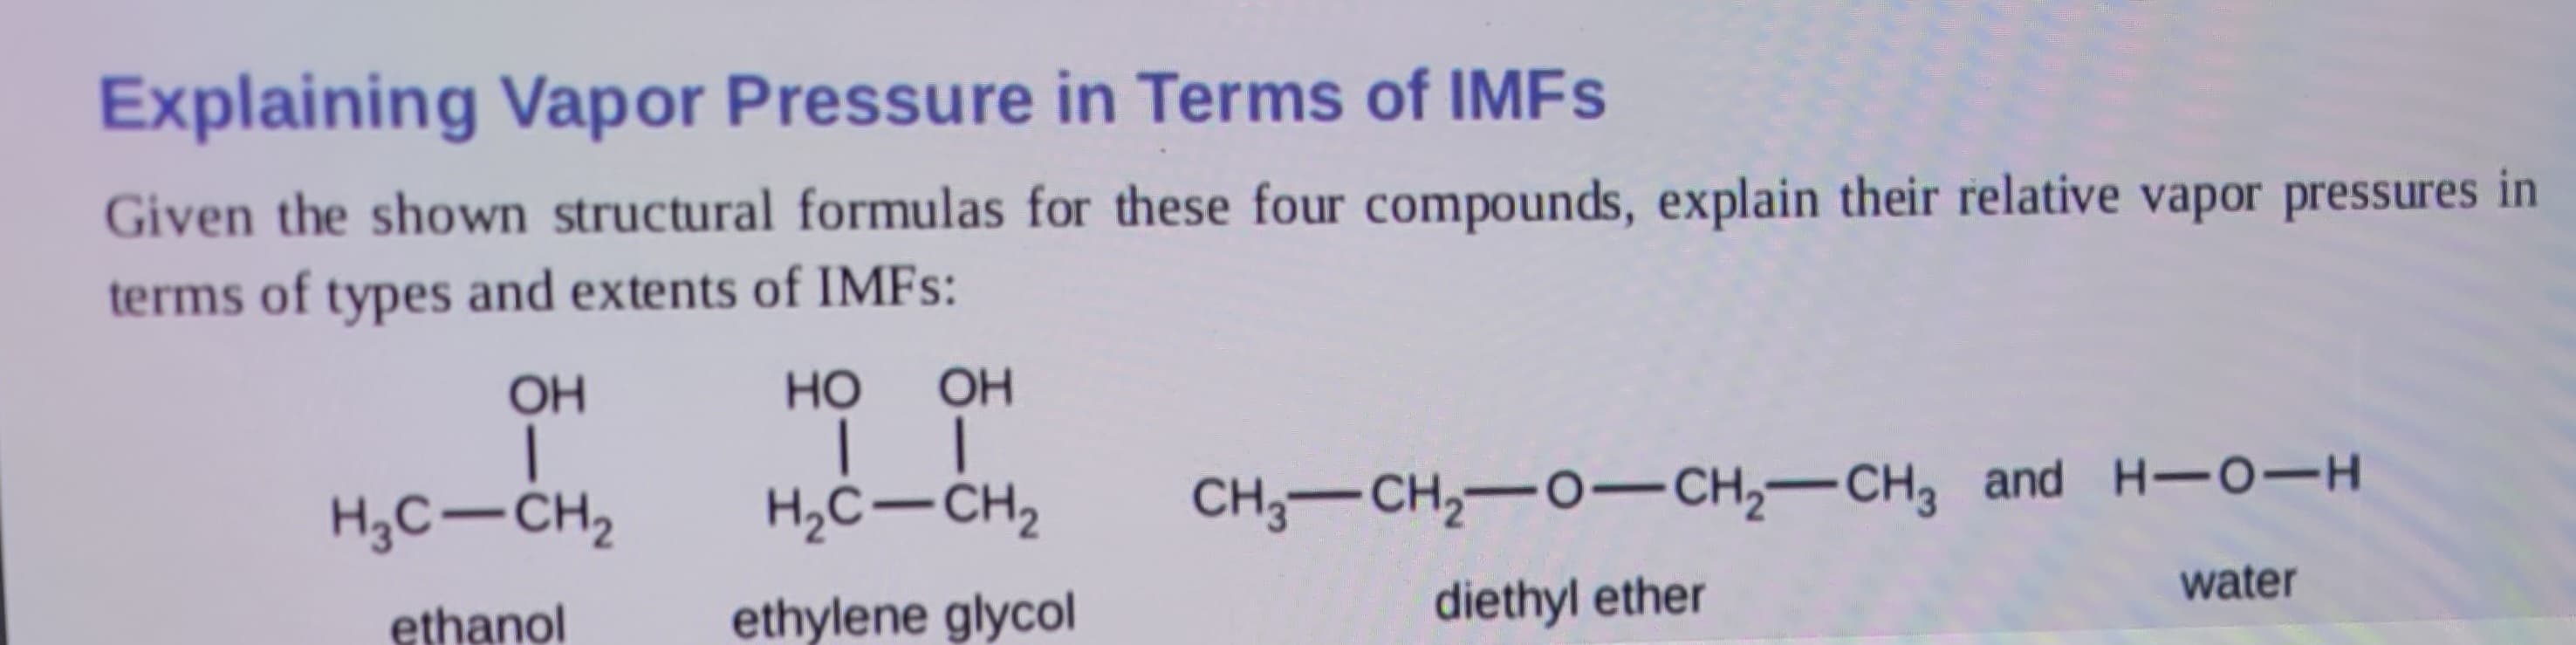 Explaining Vapor Pressure in Terms of IMFs
Given the shown structural formulas for these four compounds, explain their relative vapor pressures in
terms of types and extents of IMFs:
OH
|
H₂C-CH₂
ethanol
HO OH
││
H₂C-CH₂
ethylene glycol
CH3-CH₂-O-CH₂-CH3 and H-O-H
diethyl ether
water